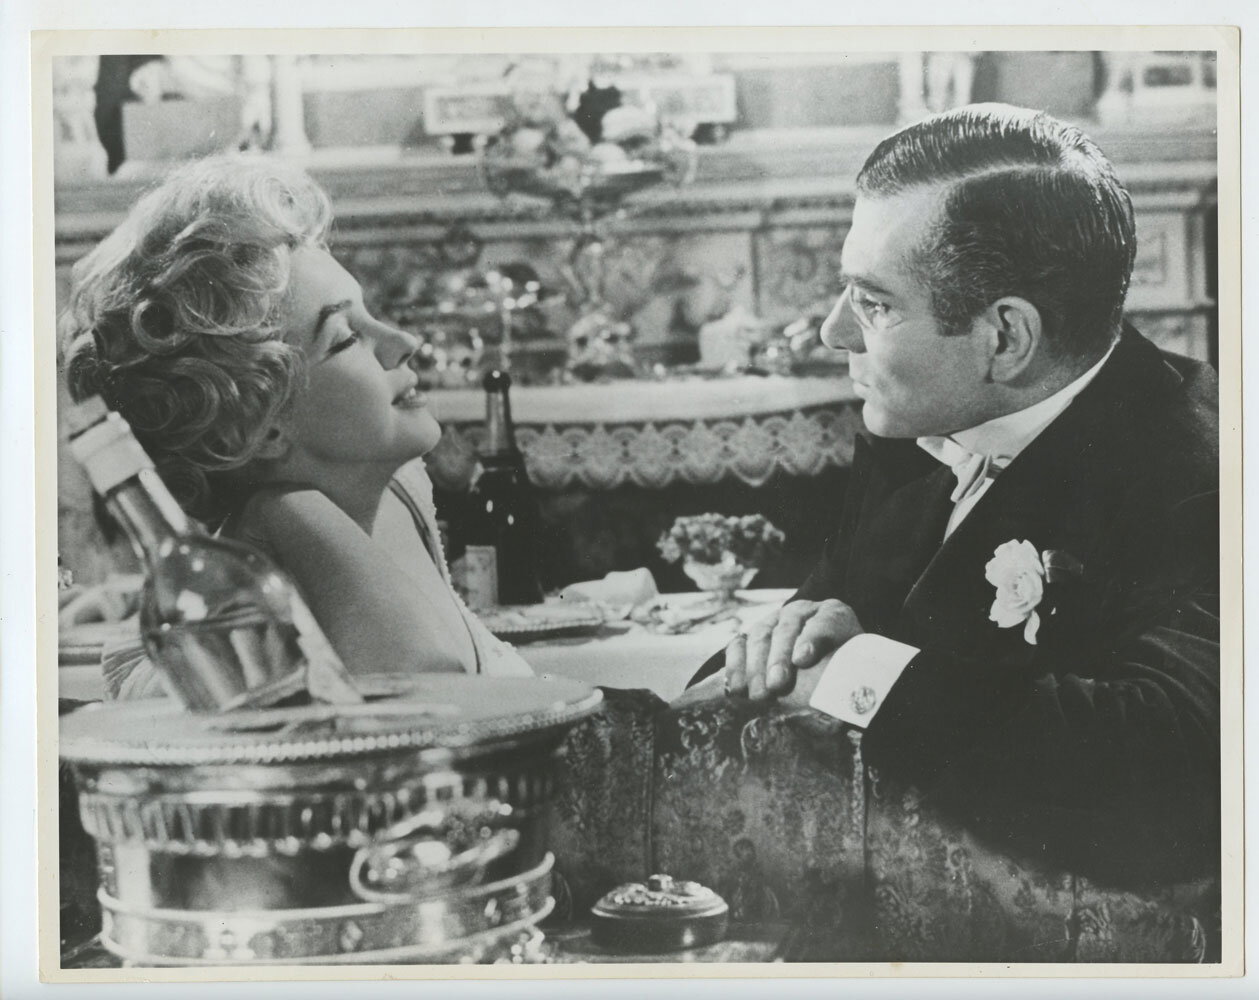 Marilyn Monroe Laurence Olivier Photo 1957 The Prince and the Showgirl Original Vintage